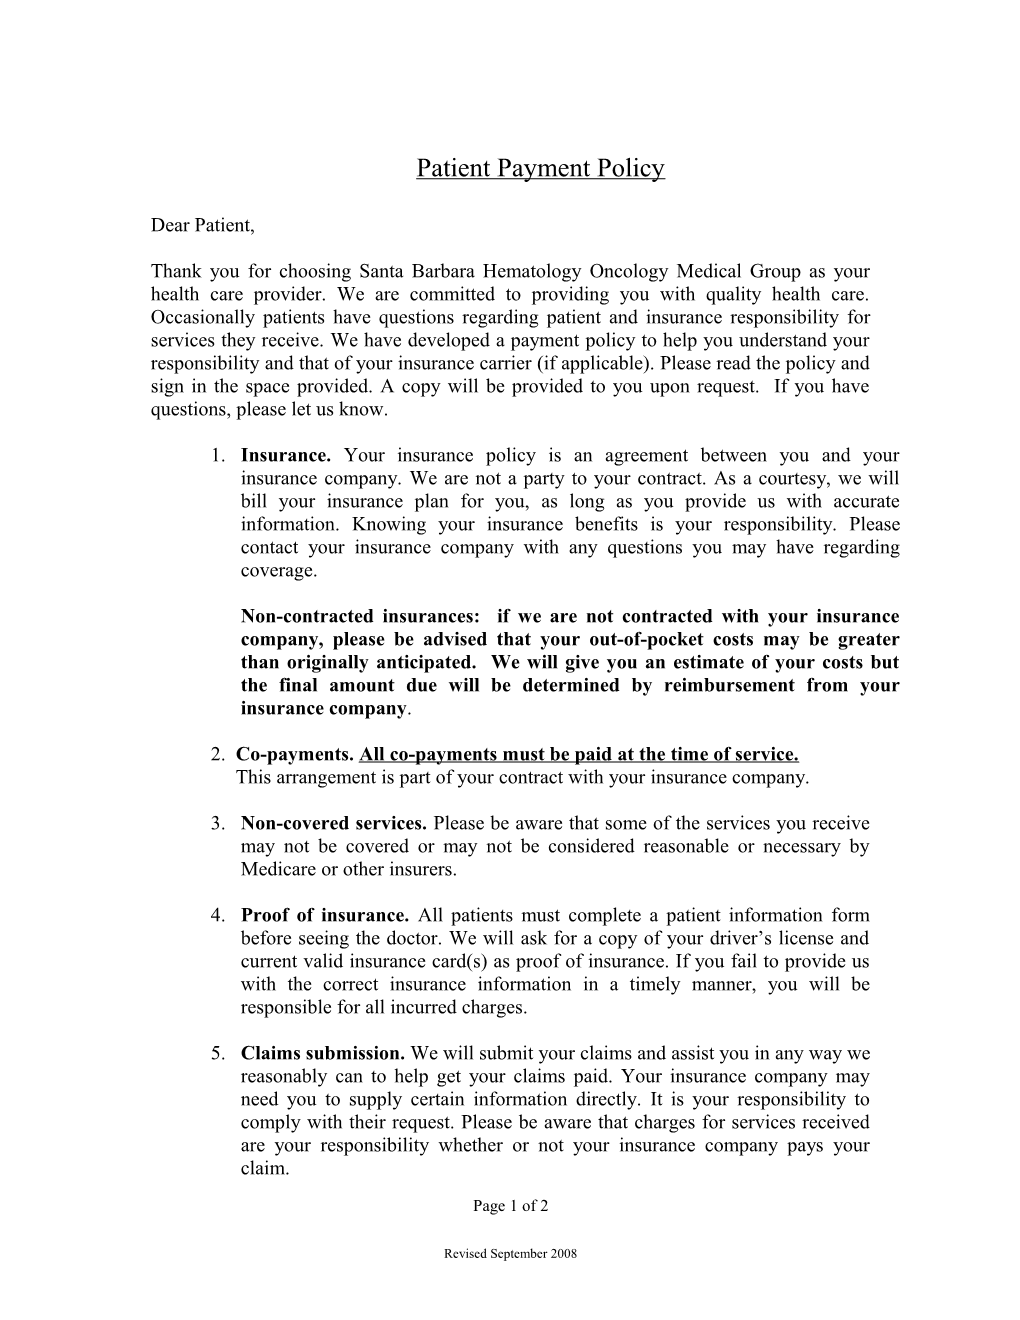 Patient Payment Policy